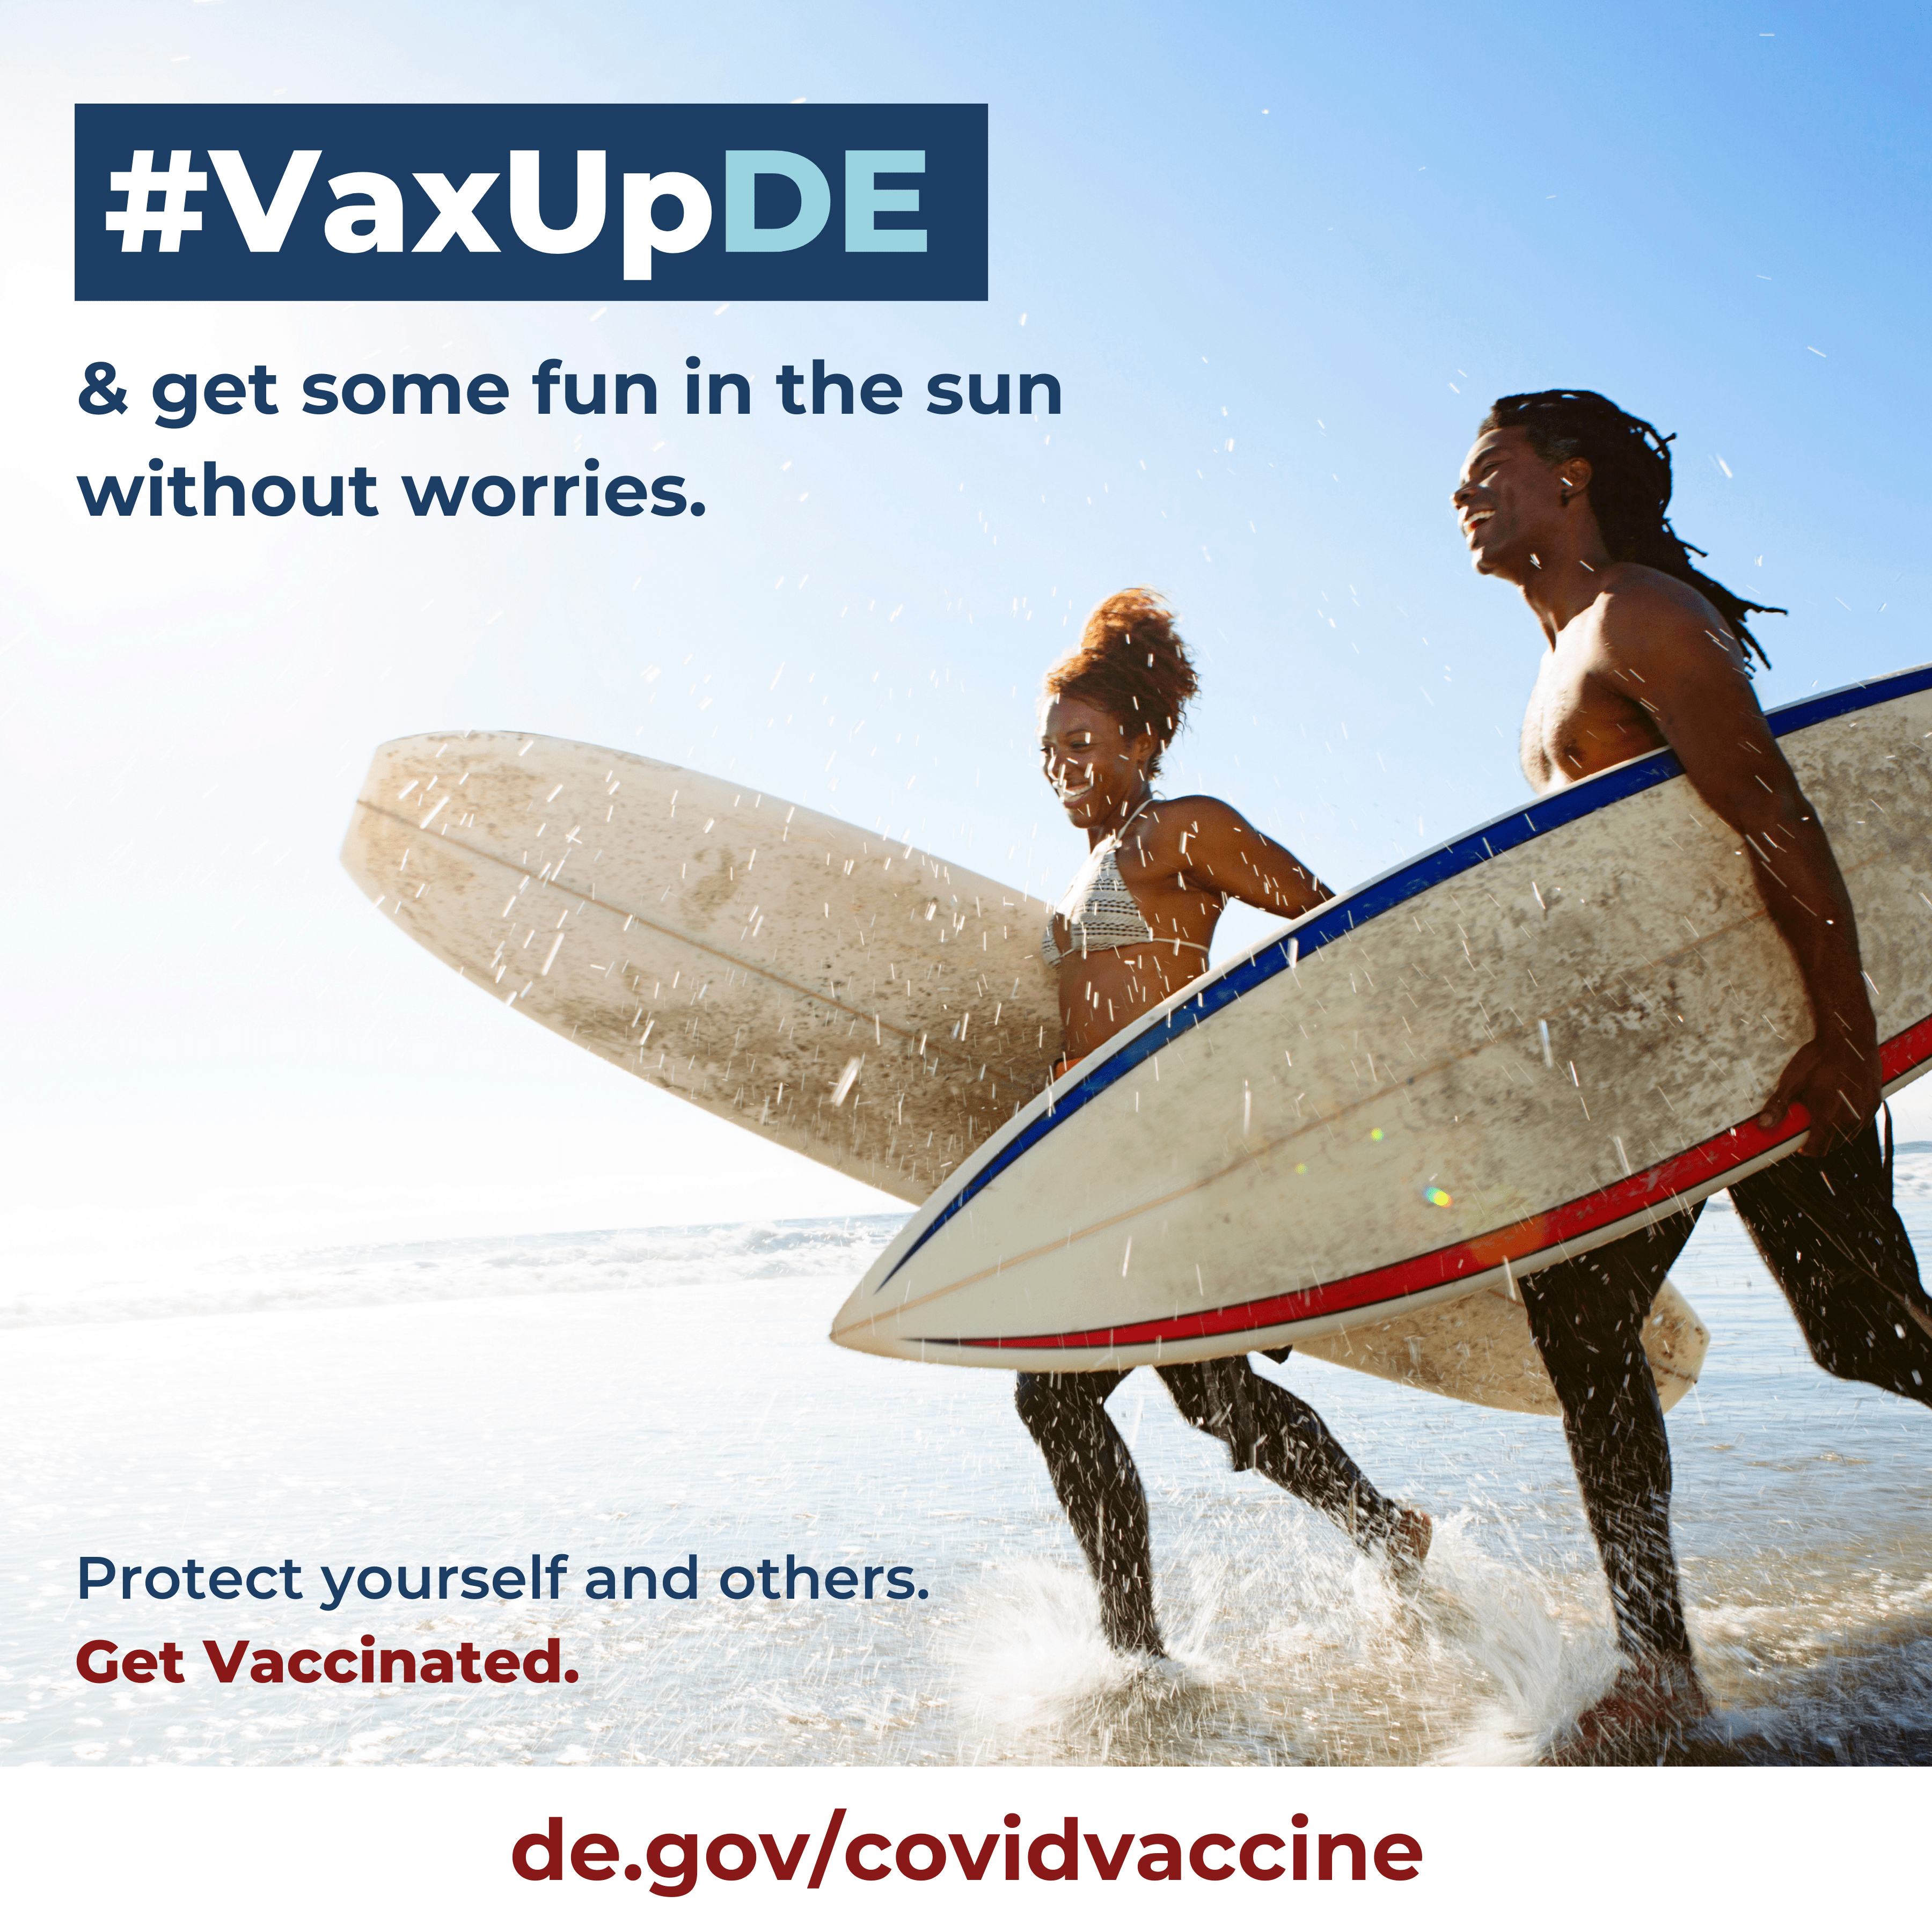 VaxUpDE and get some fun in the sun without worries. Protect yourself and other. Get Vaccinated. A man and woman going surfing.